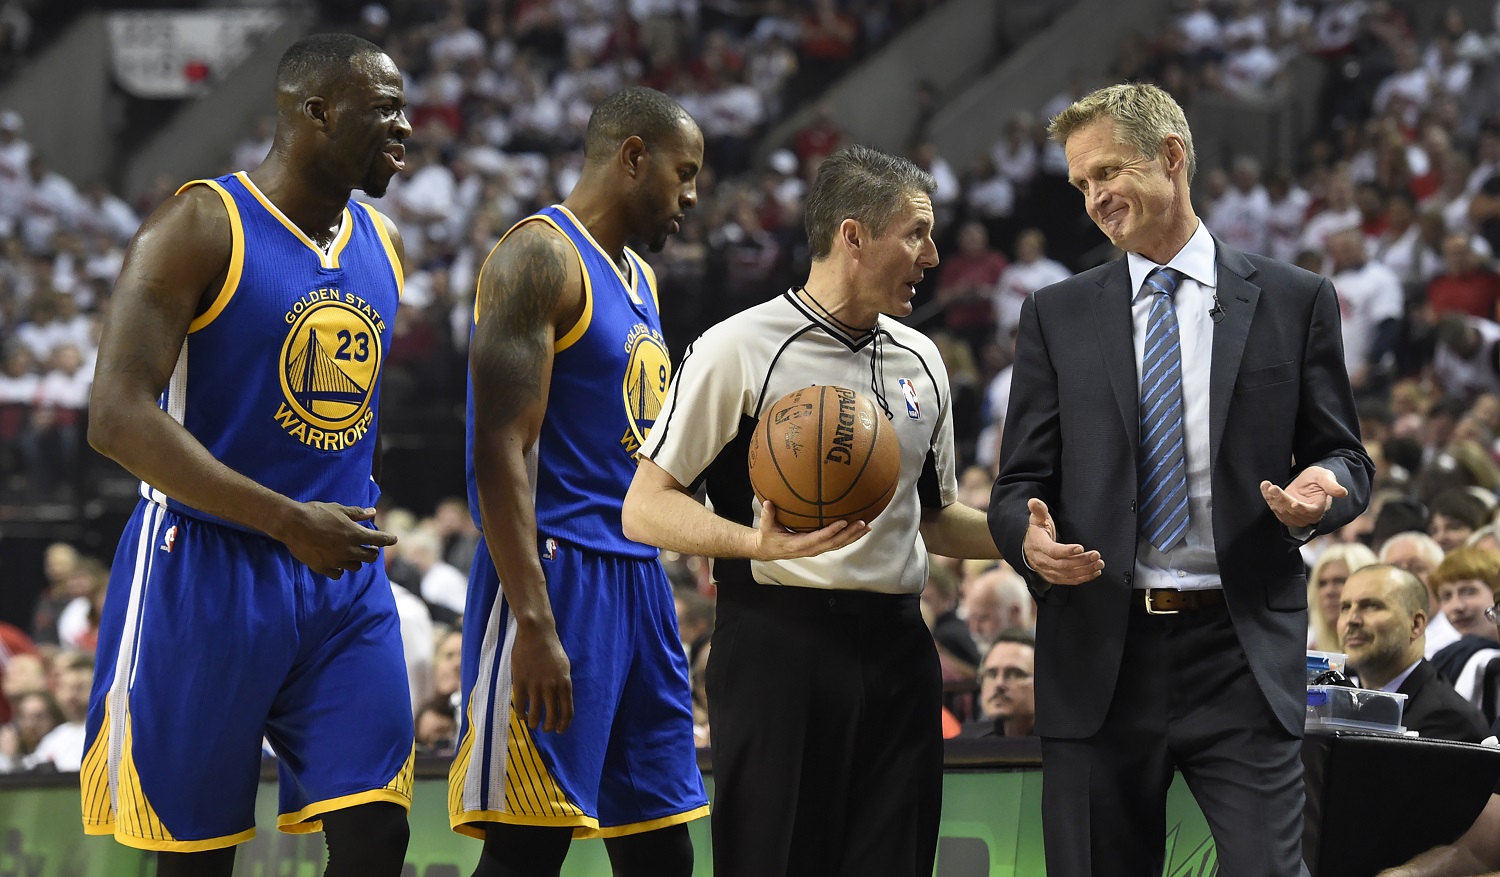 PORTLAND, OR - MAY 9: Draymond Green, Andre Iguodala #9 and head coach Steve Kerr of the Golden State Warriors have some words with referee Scott Foster #48 during the first quarter of Game Four of the Western Conference Semifinals against the Portland Trail Blazers during the 2016 NBA Playoffs at the Moda Center on May 9, 2016 in Portland, Oregon. NOTE TO USER: User expressly acknowledges and agrees that by downloading and/or using this photograph, user is consenting to the terms and conditions of the Getty Images License Agreement.  (Photo by Steve Dykes/Getty Images)